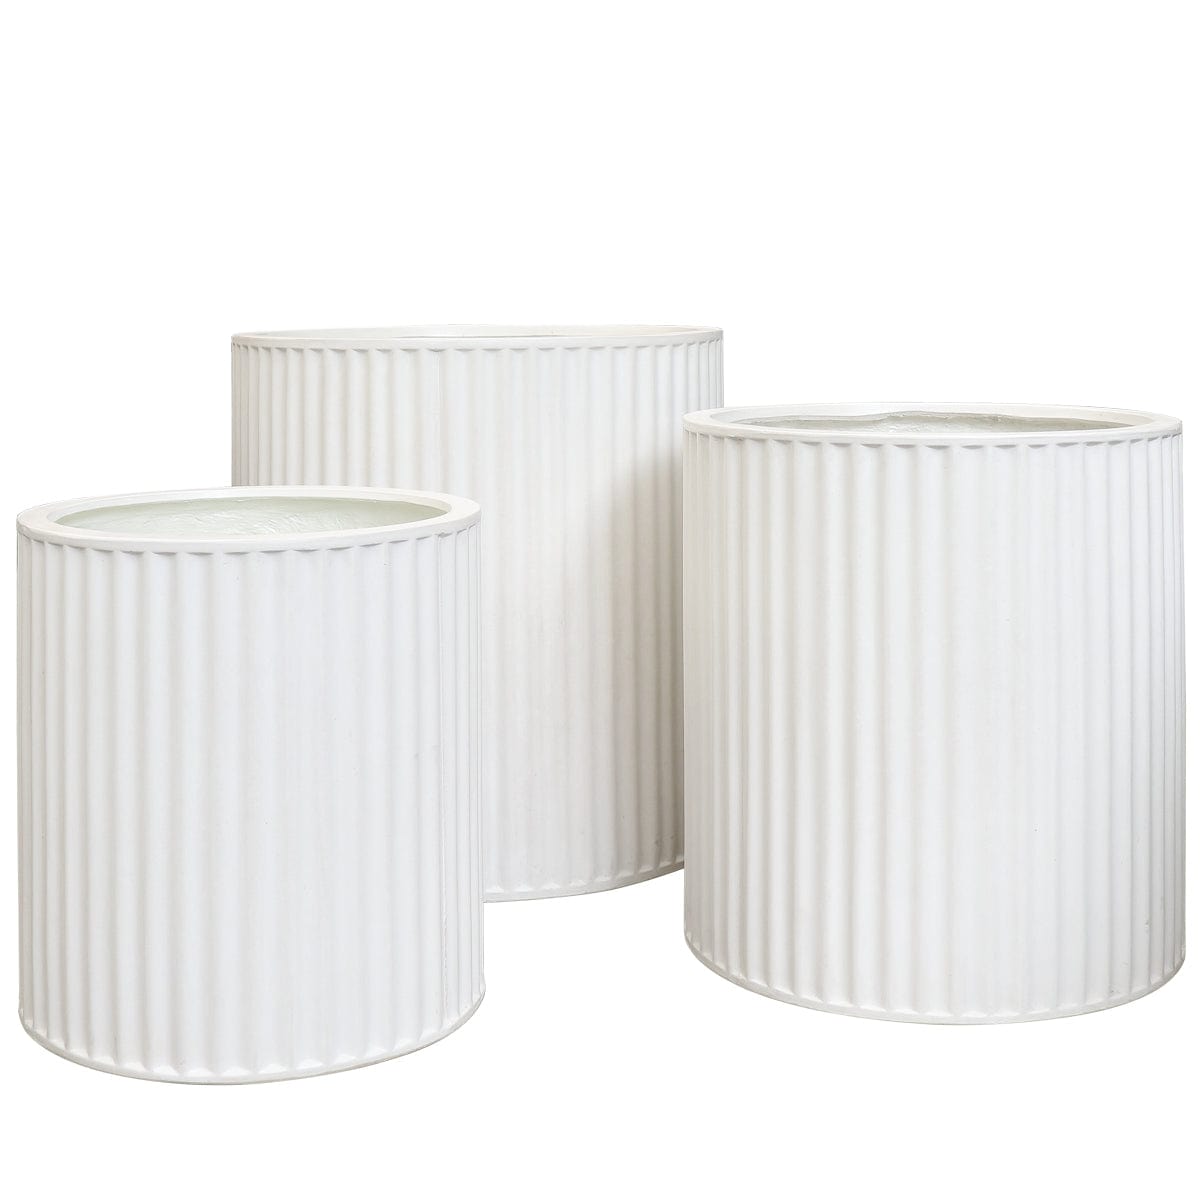 Piako Ribbed Cylinder Planter Small  - White PRE ORDER